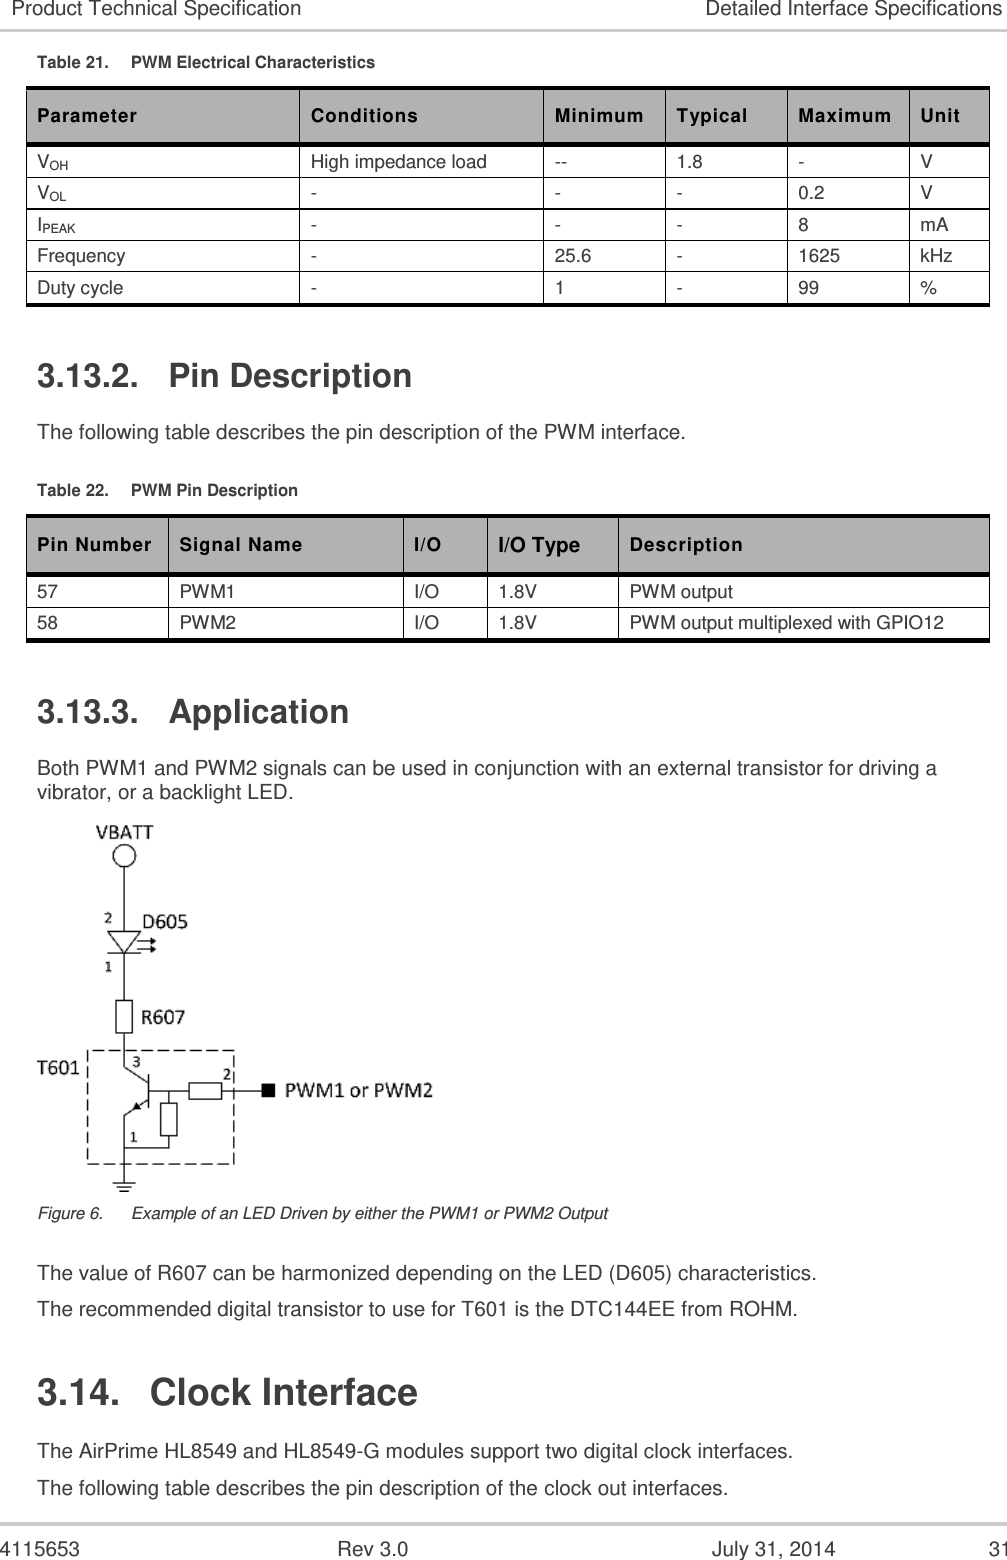  4115653  Rev 3.0  July 31, 2014  31 Product Technical Specification Detailed Interface Specifications Table 21.  PWM Electrical Characteristics Parameter Conditions Minimum Typical Maximum Unit VOH High impedance load -- 1.8 - V VOL - - - 0.2 V IPEAK - - - 8 mA Frequency - 25.6 - 1625 kHz Duty cycle - 1 - 99 % 3.13.2.  Pin Description The following table describes the pin description of the PWM interface. Table 22.  PWM Pin Description Pin Number Signal Name I/O I/O Type Description 57 PWM1 I/O 1.8V PWM output 58 PWM2 I/O 1.8V PWM output multiplexed with GPIO12 3.13.3.  Application Both PWM1 and PWM2 signals can be used in conjunction with an external transistor for driving a vibrator, or a backlight LED.  Figure 6.  Example of an LED Driven by either the PWM1 or PWM2 Output The value of R607 can be harmonized depending on the LED (D605) characteristics. The recommended digital transistor to use for T601 is the DTC144EE from ROHM. 3.14.  Clock Interface The AirPrime HL8549 and HL8549-G modules support two digital clock interfaces. The following table describes the pin description of the clock out interfaces. 